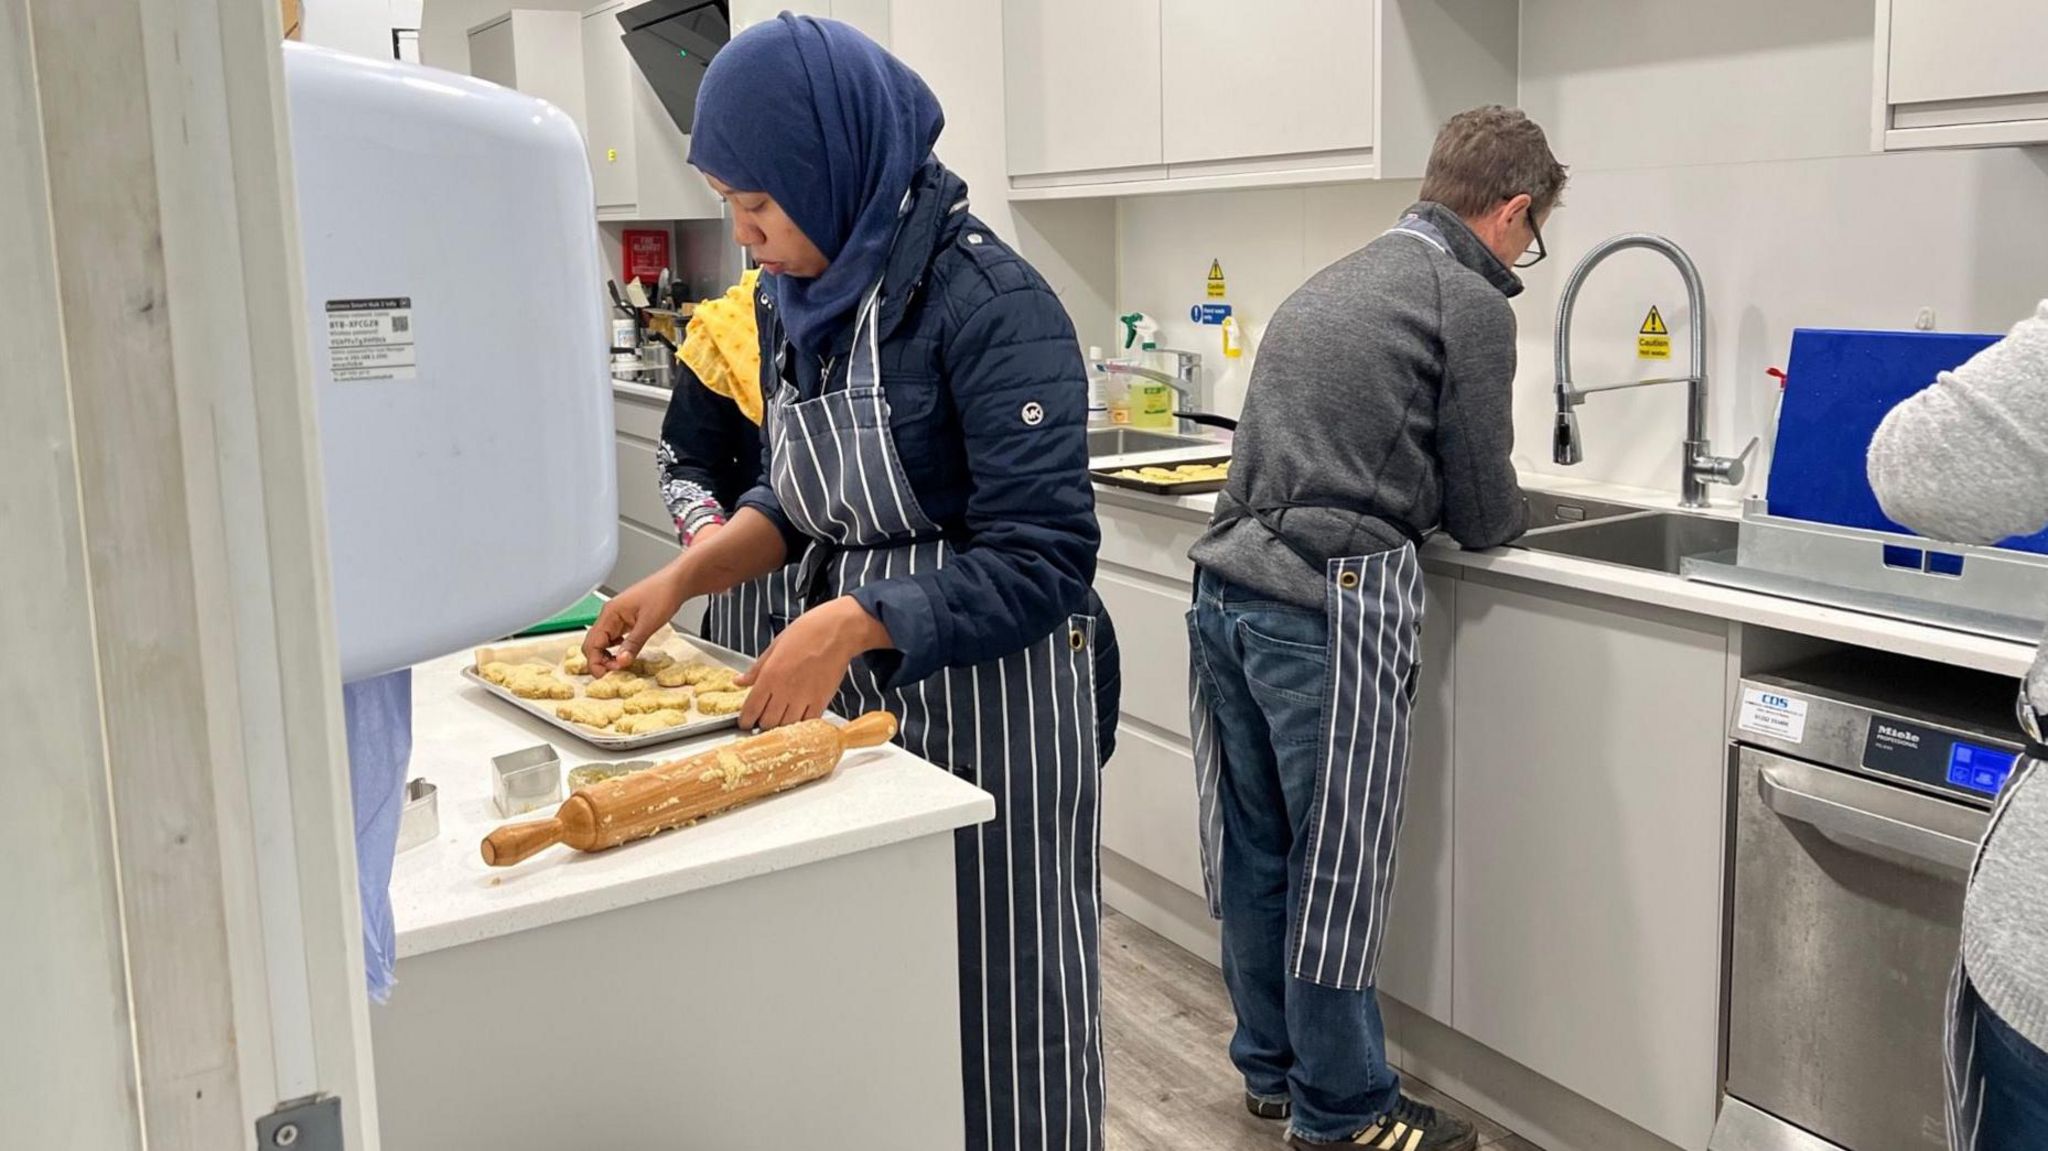 Asylum seekers cooking traditional dishes from their home countries